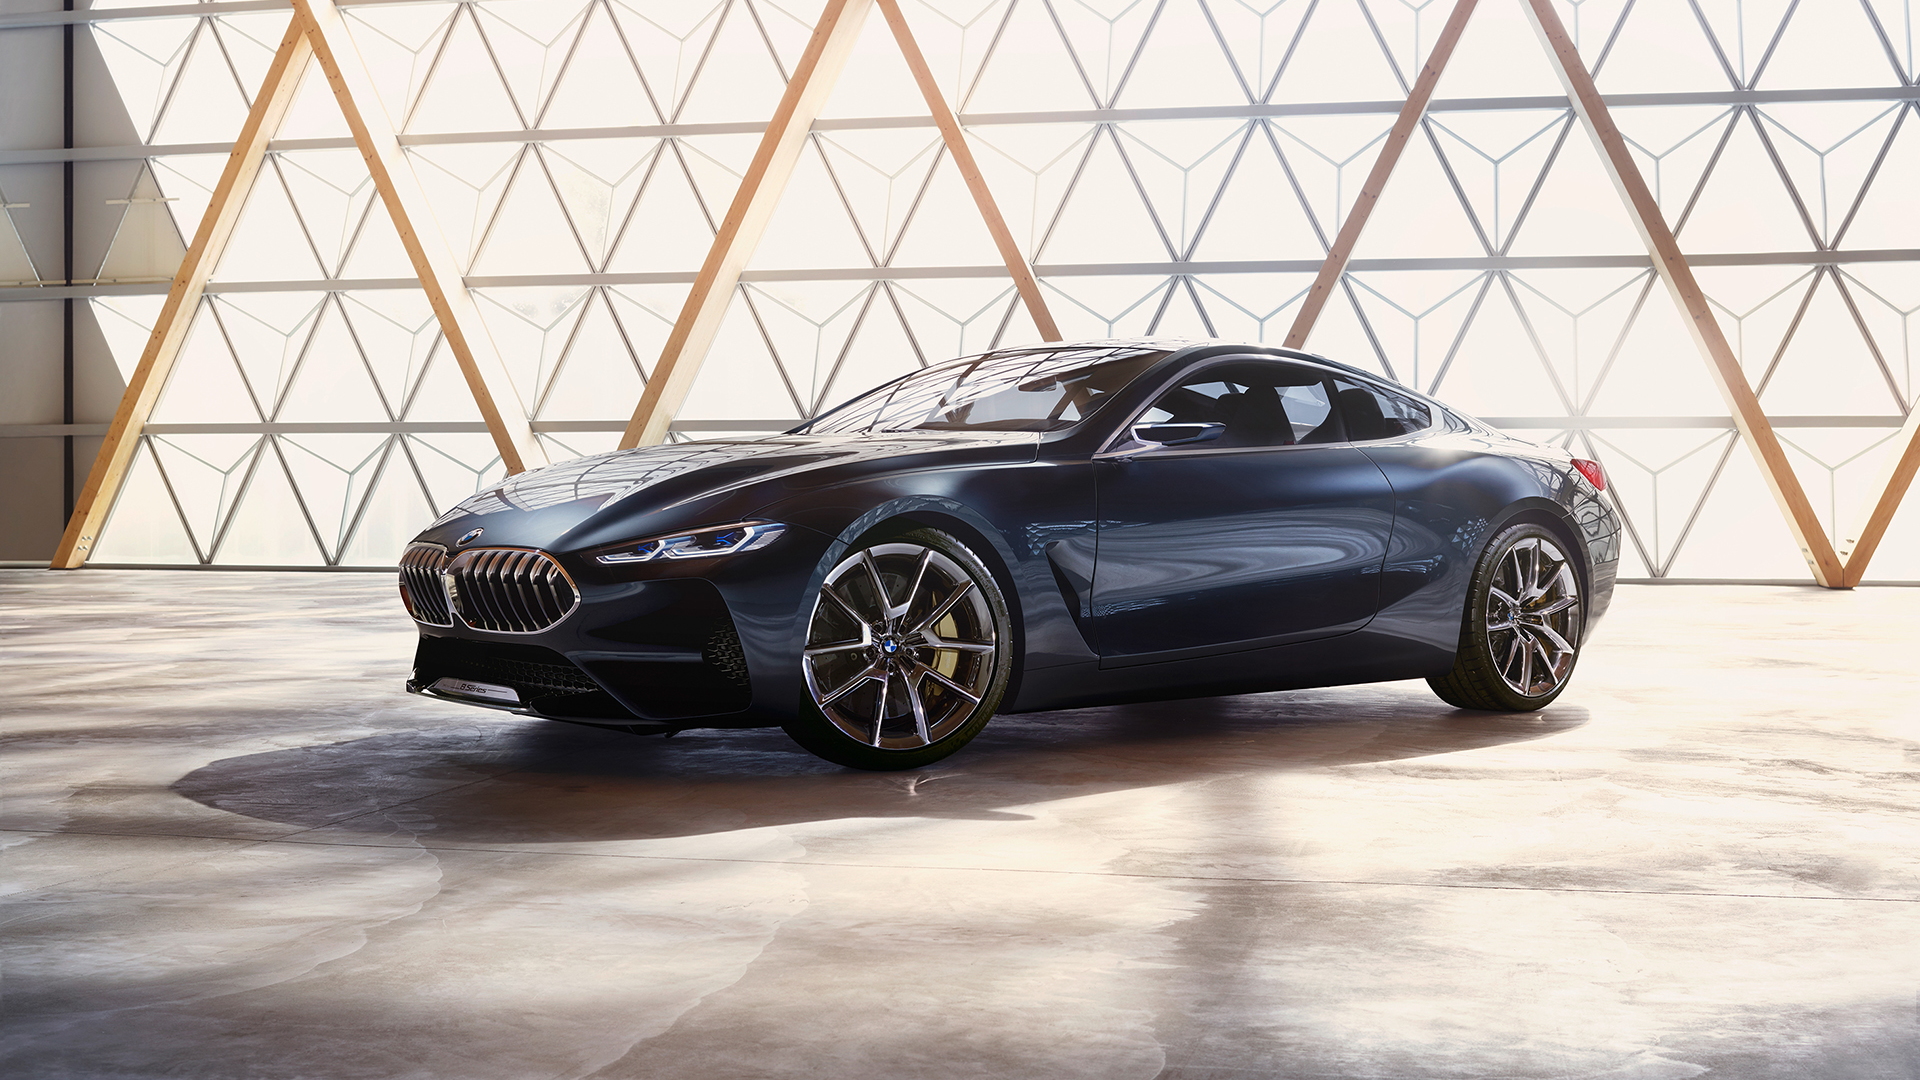 BMW 8-Series concept revealed, that escalated quickly